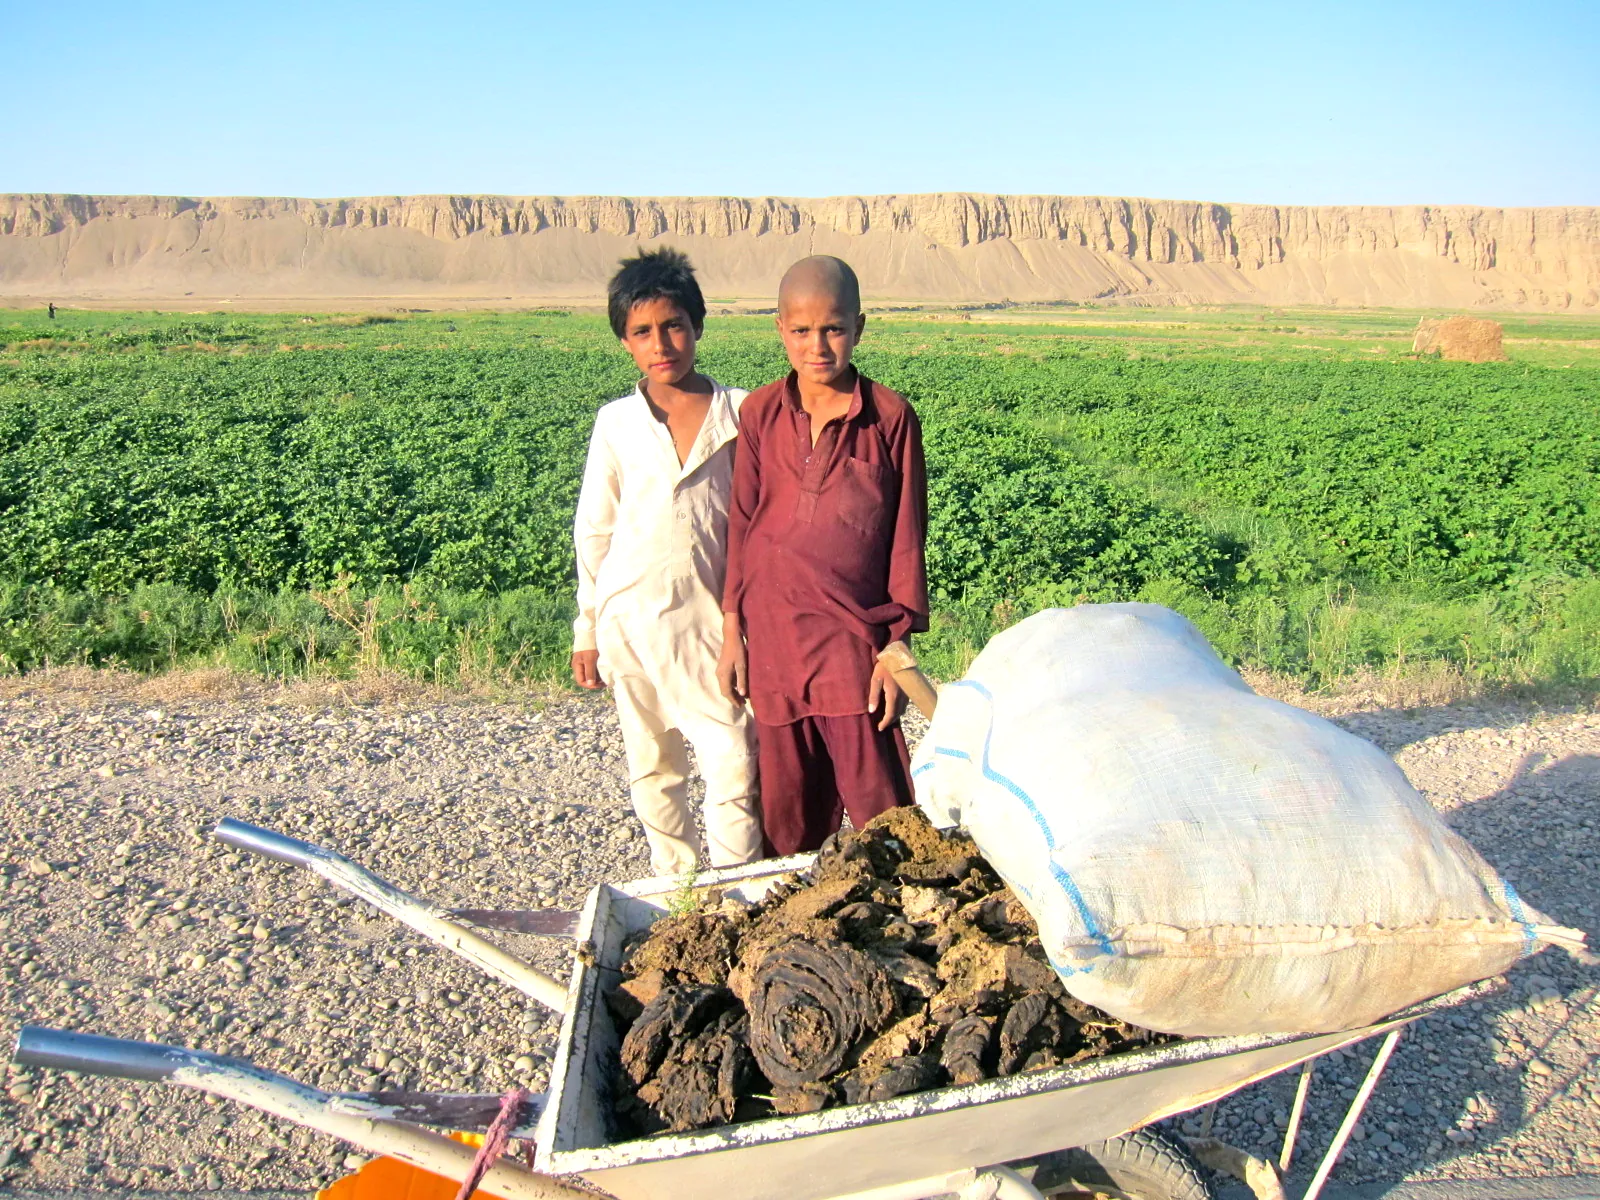 Afghan boys with some cheeky cow dung, in Mazar-e Sharif